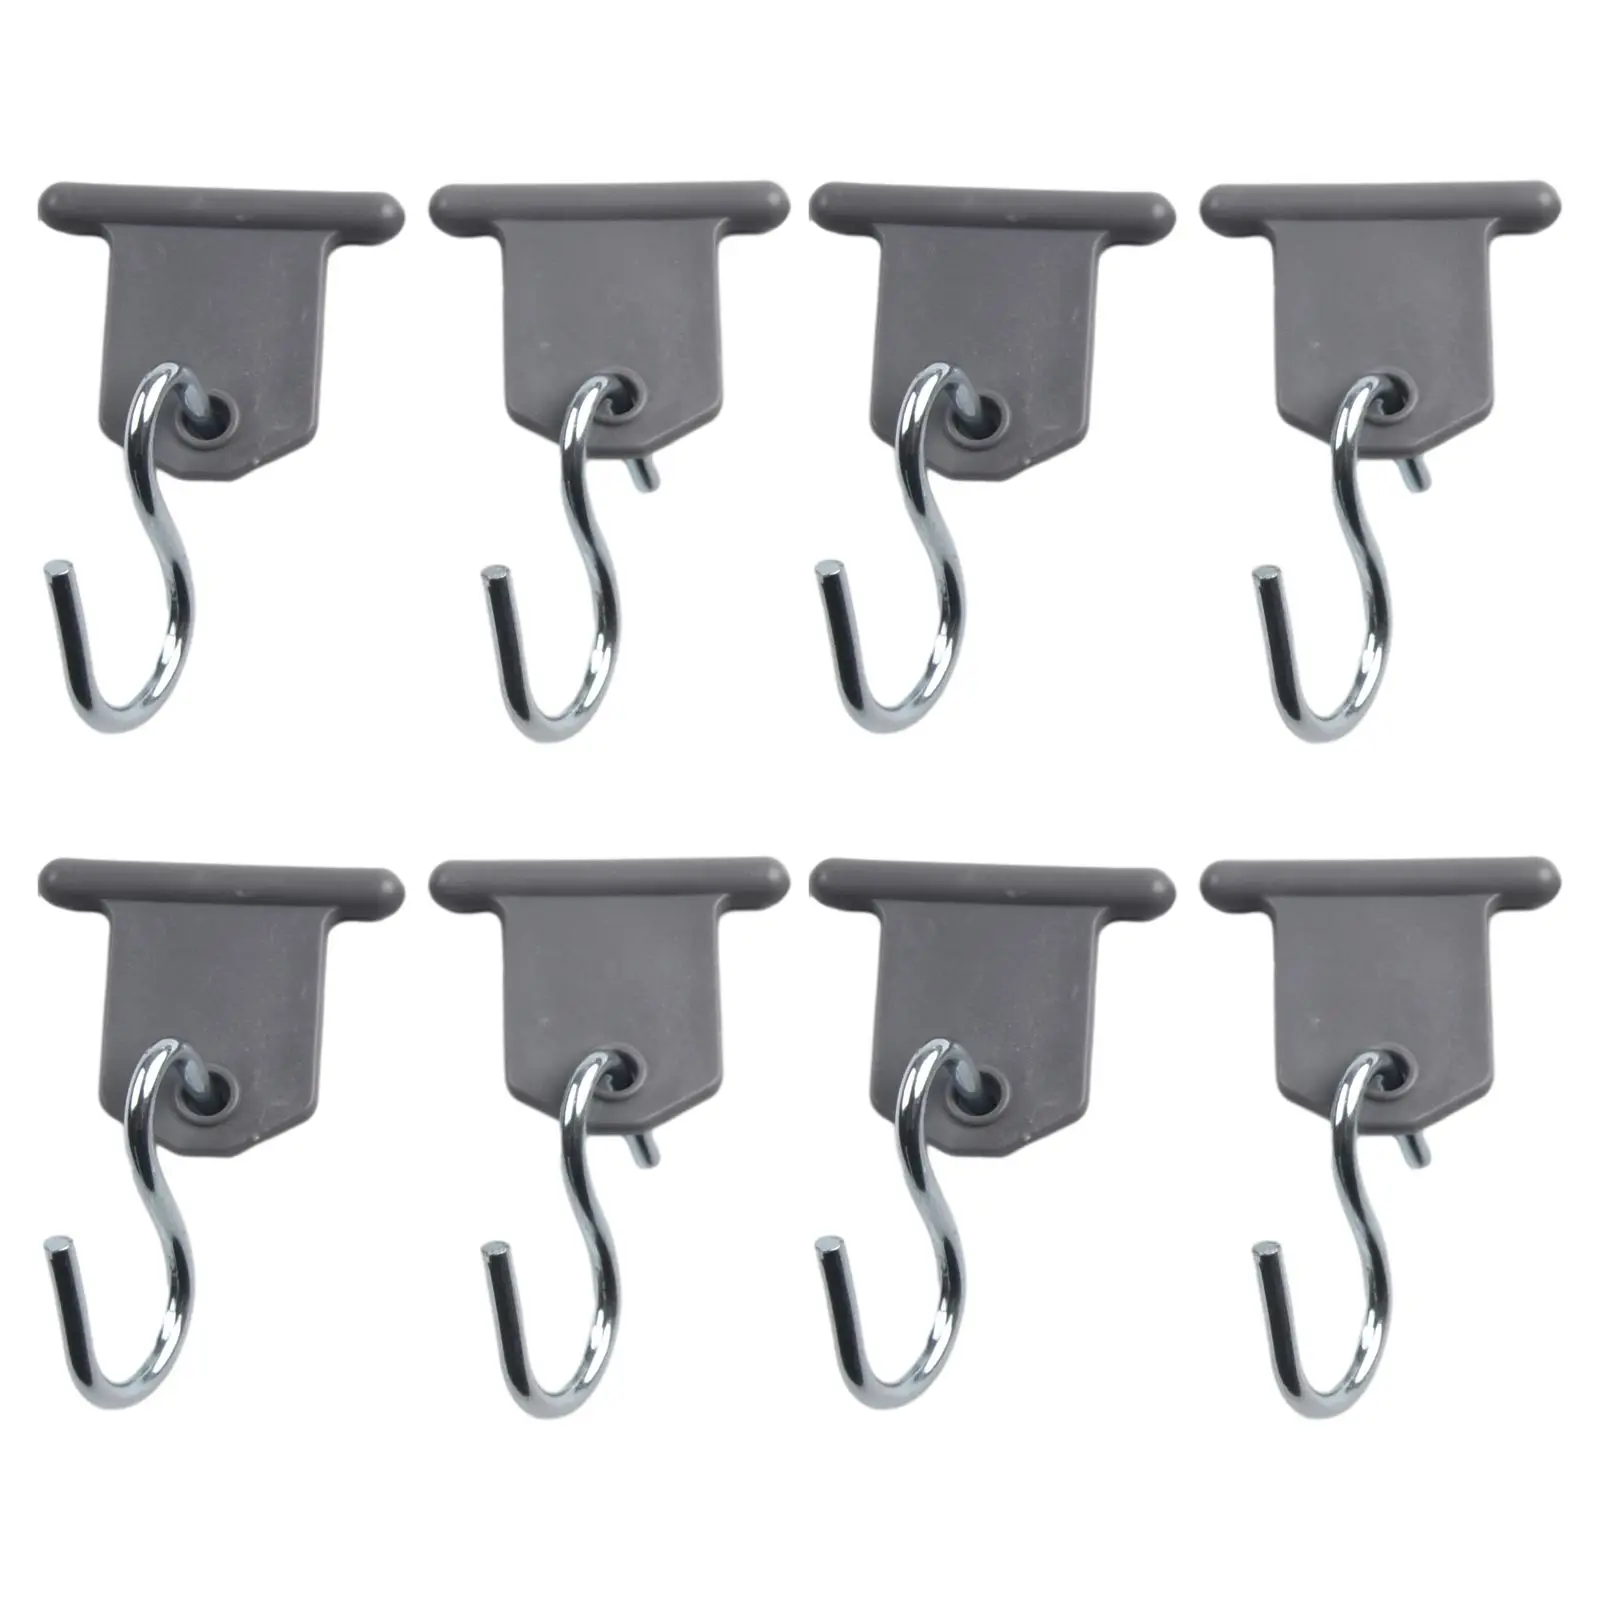 8PCS Camping Awning Hooks Clips RV Tent Hangers Light Hangers For Caravan Camper Hanging Bath Towels Bathrobes Umbrellas 8pcs linear bar rgbwa pixel wall washer indoor led stage light 14x15w 5in1 led rgbwa wall washer dmx light